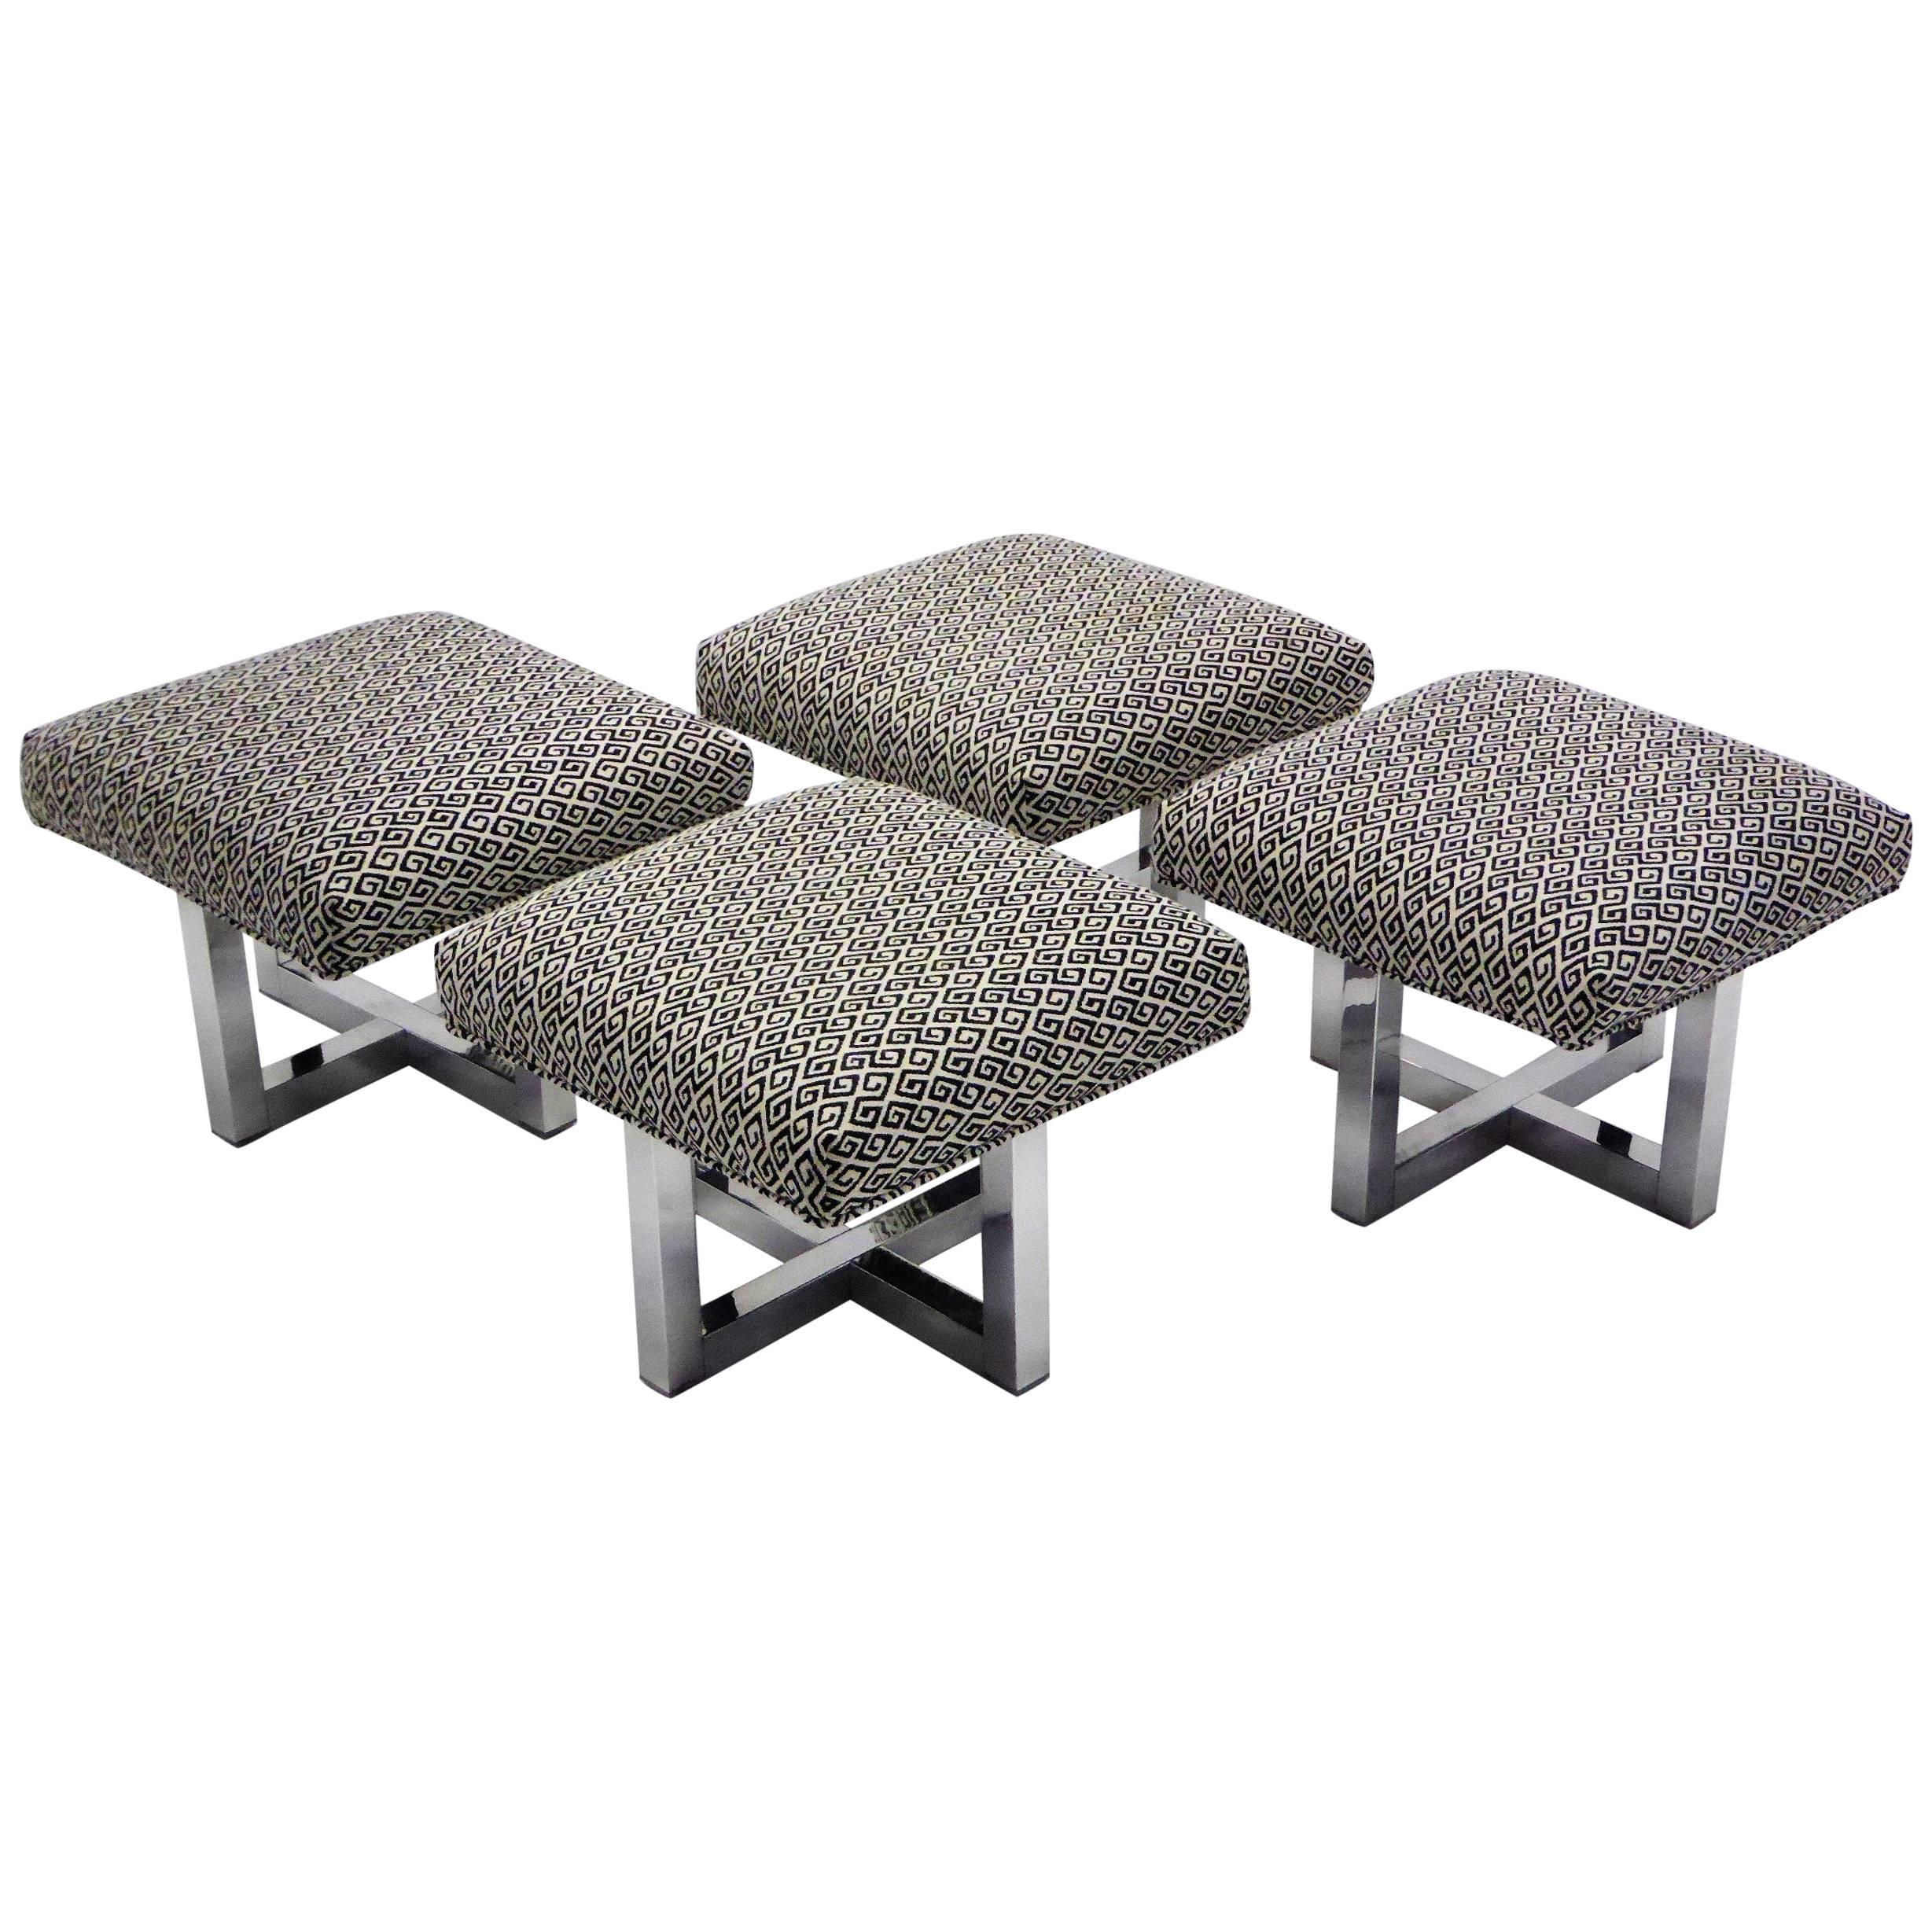 Milo Baughman Style Bench Stools Polished Aluminum Upholstered 2 pairs available